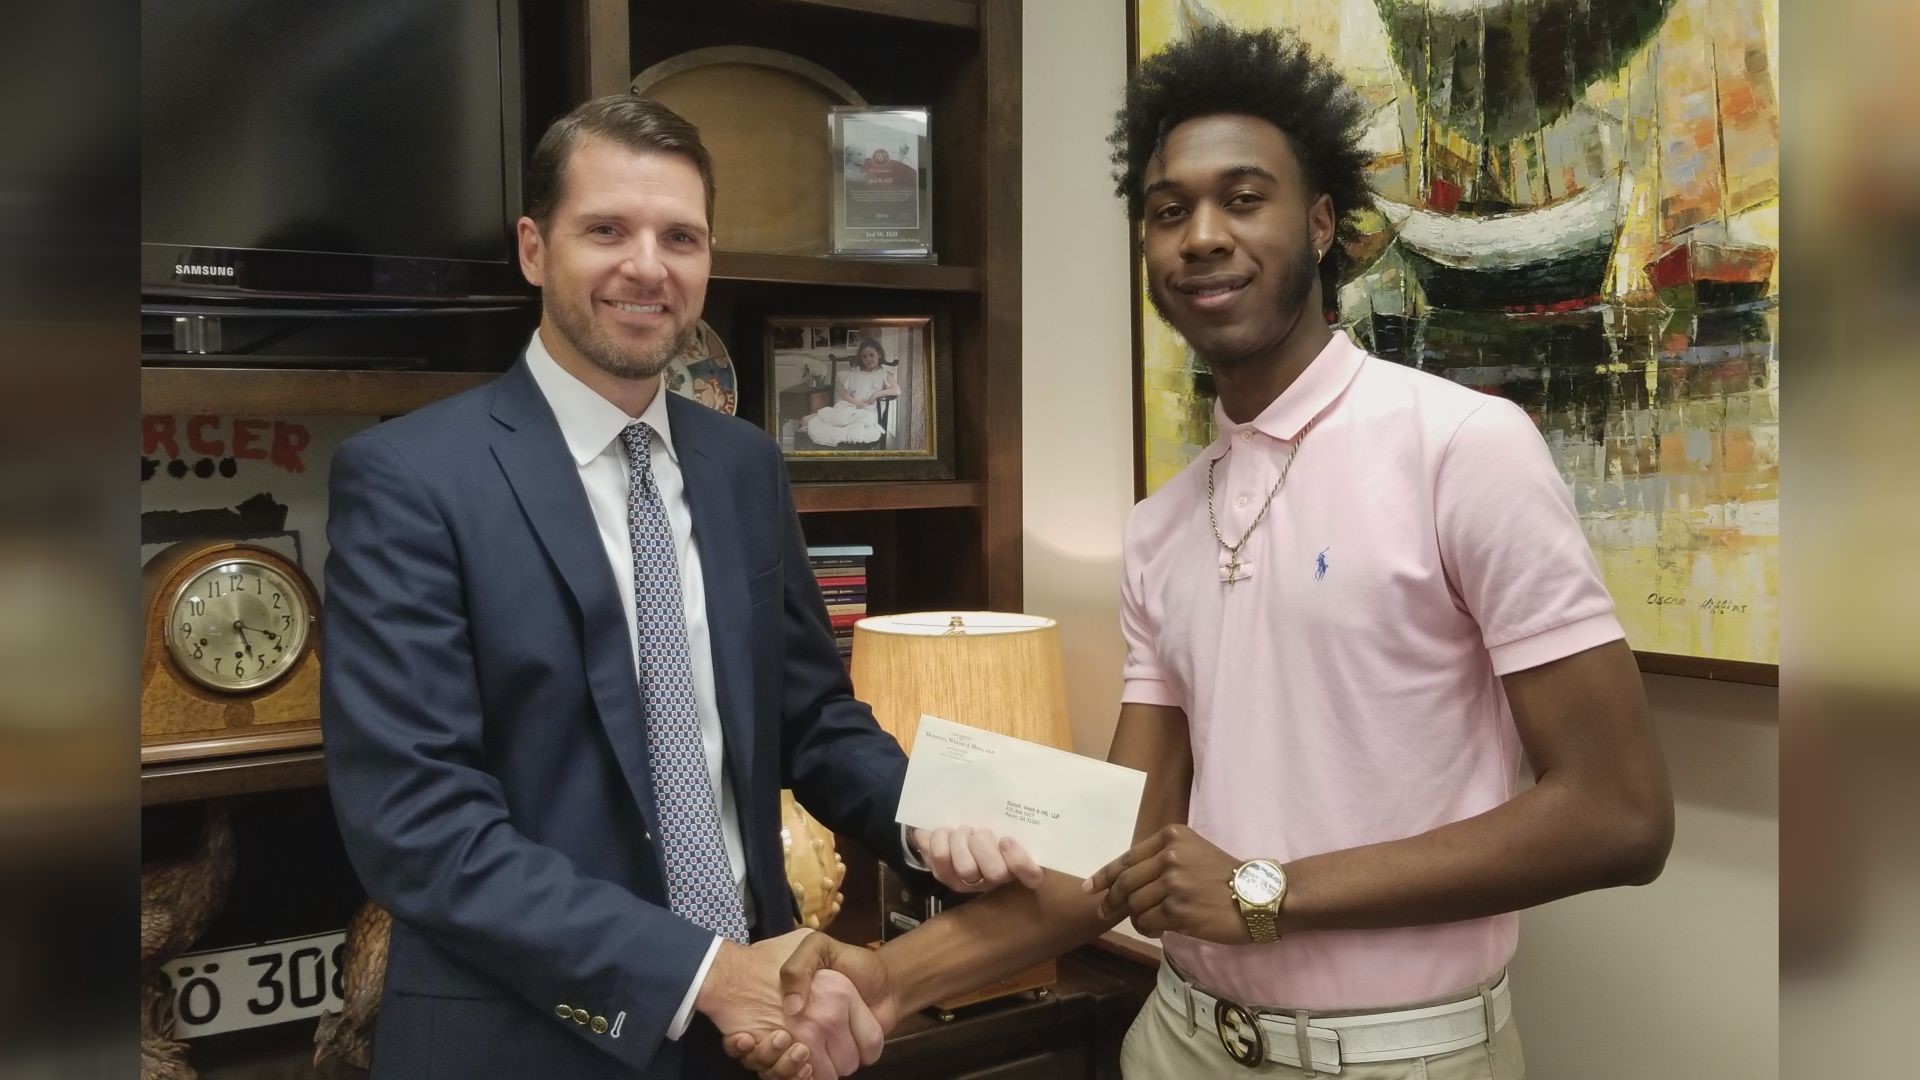 The Buzzell, Welsh and Hill law firm awarded Adrian Thomas, Jr. $2500 for his essay on a new driving law that could help teens behind the wheel